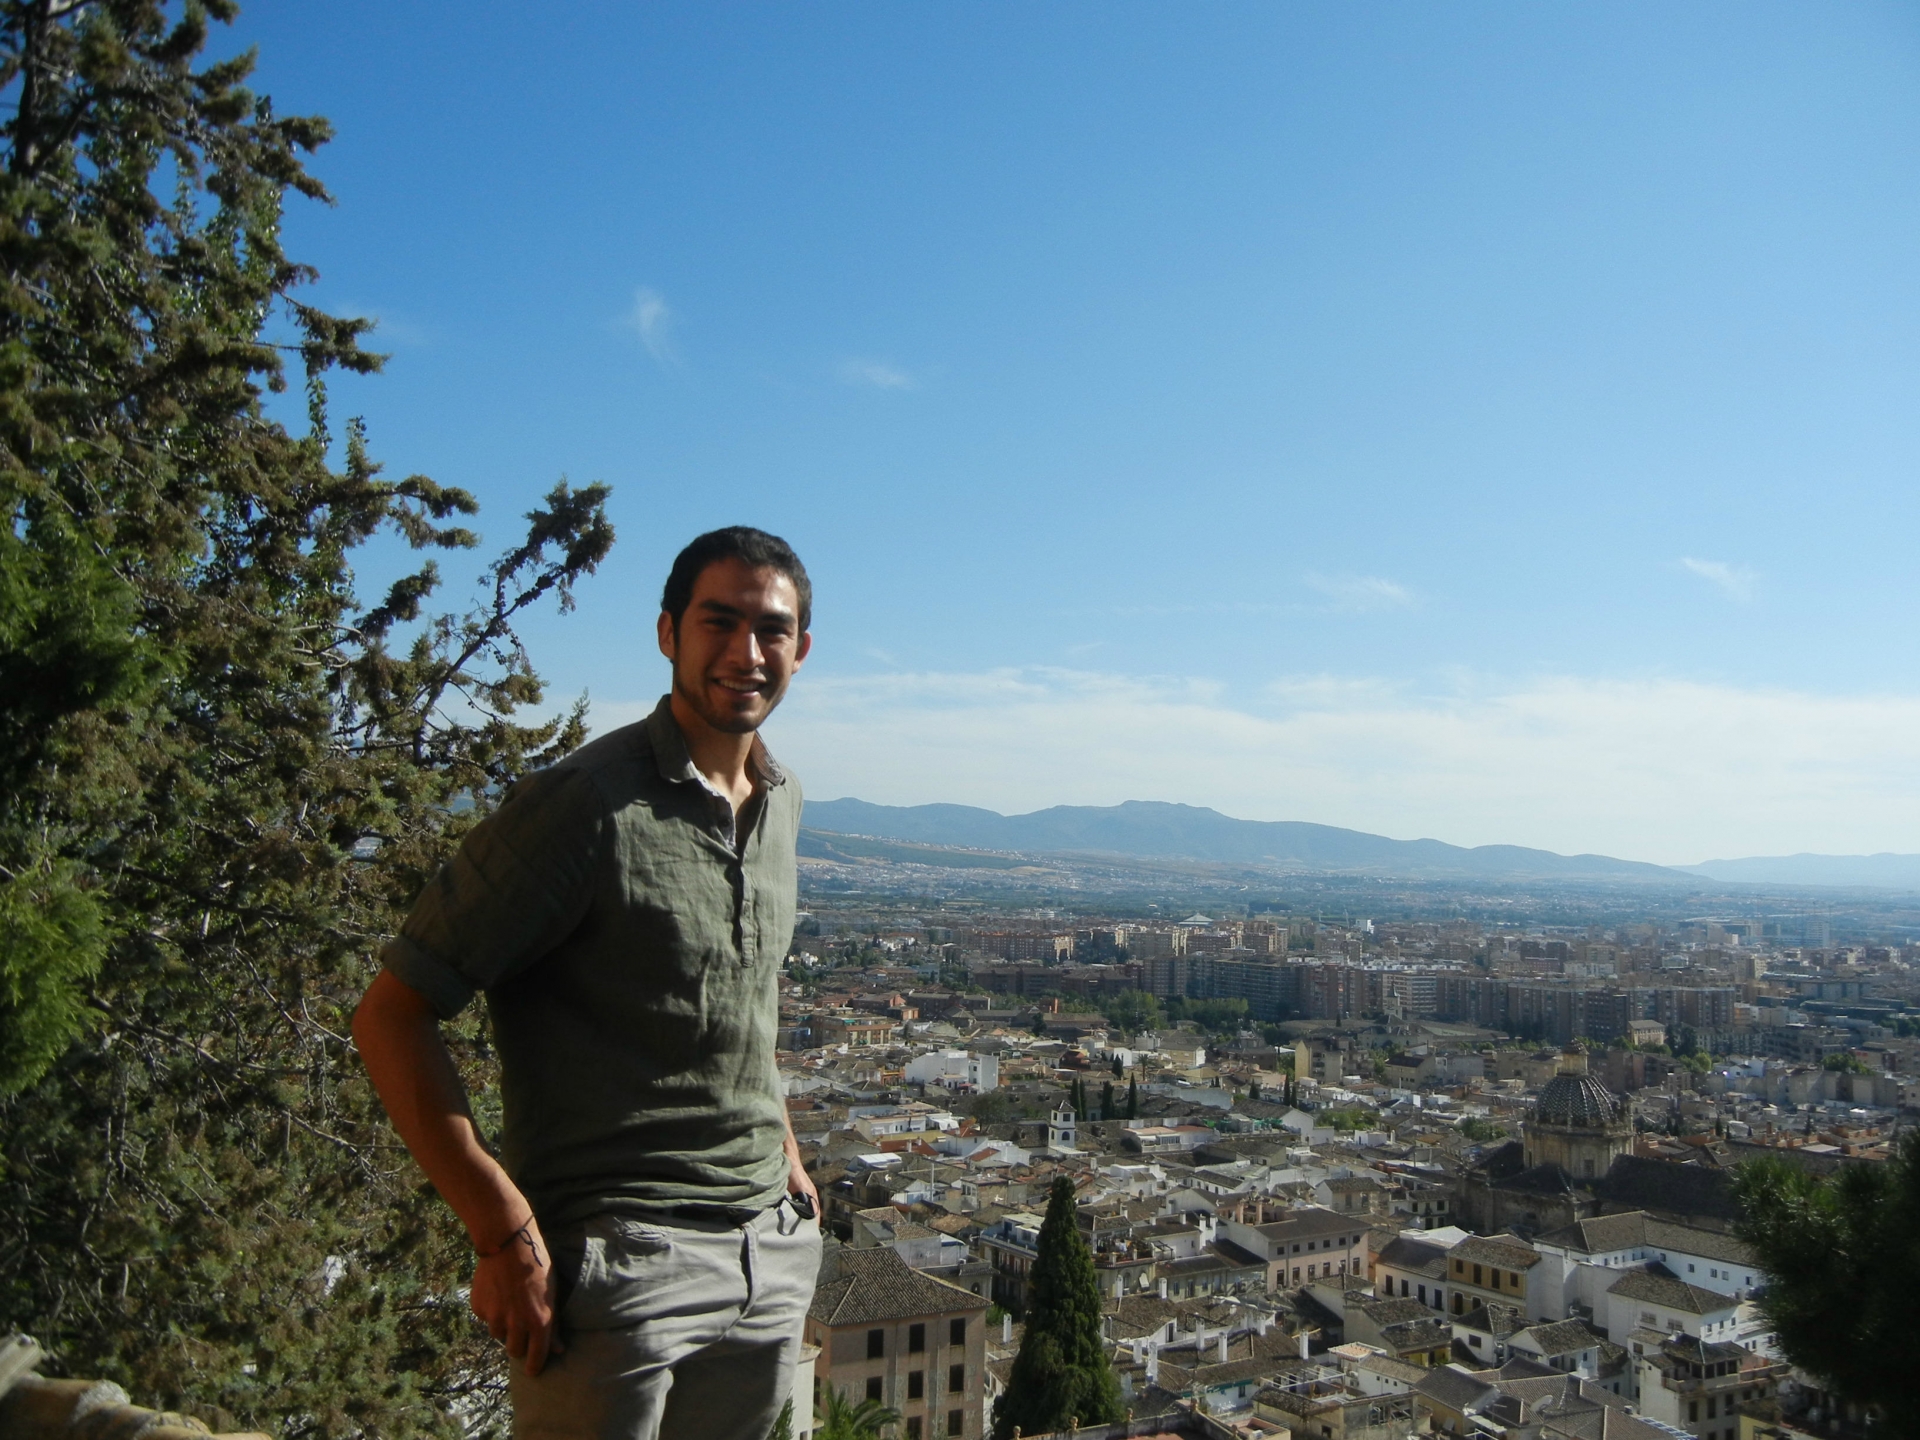 Daniel Robles standing atop a building overlooking a city in Spain.